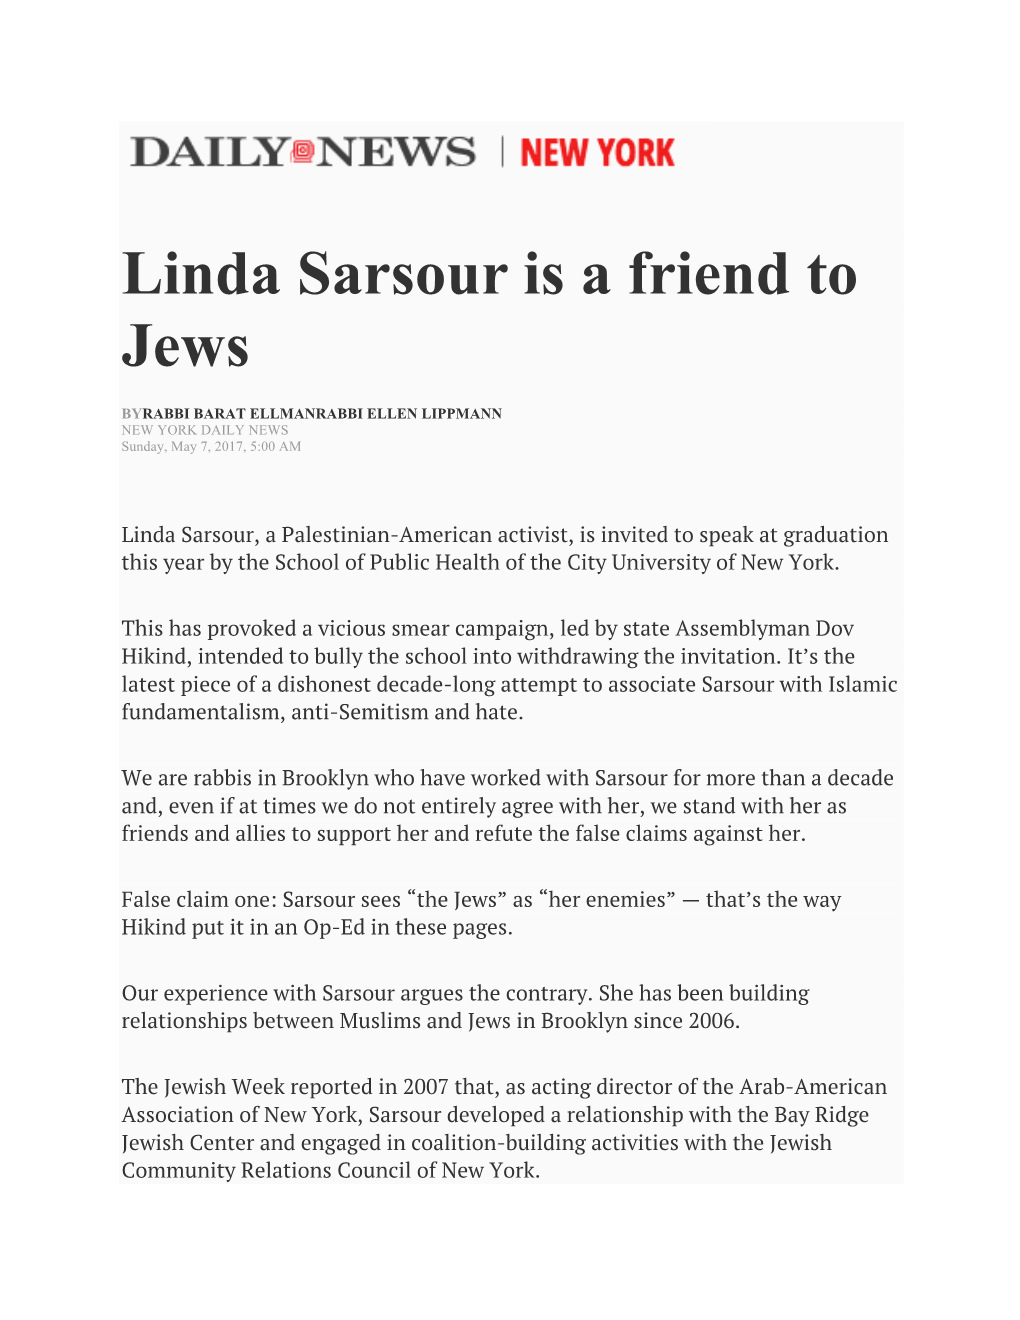 Linda Sarsour Is a Friend to Jews